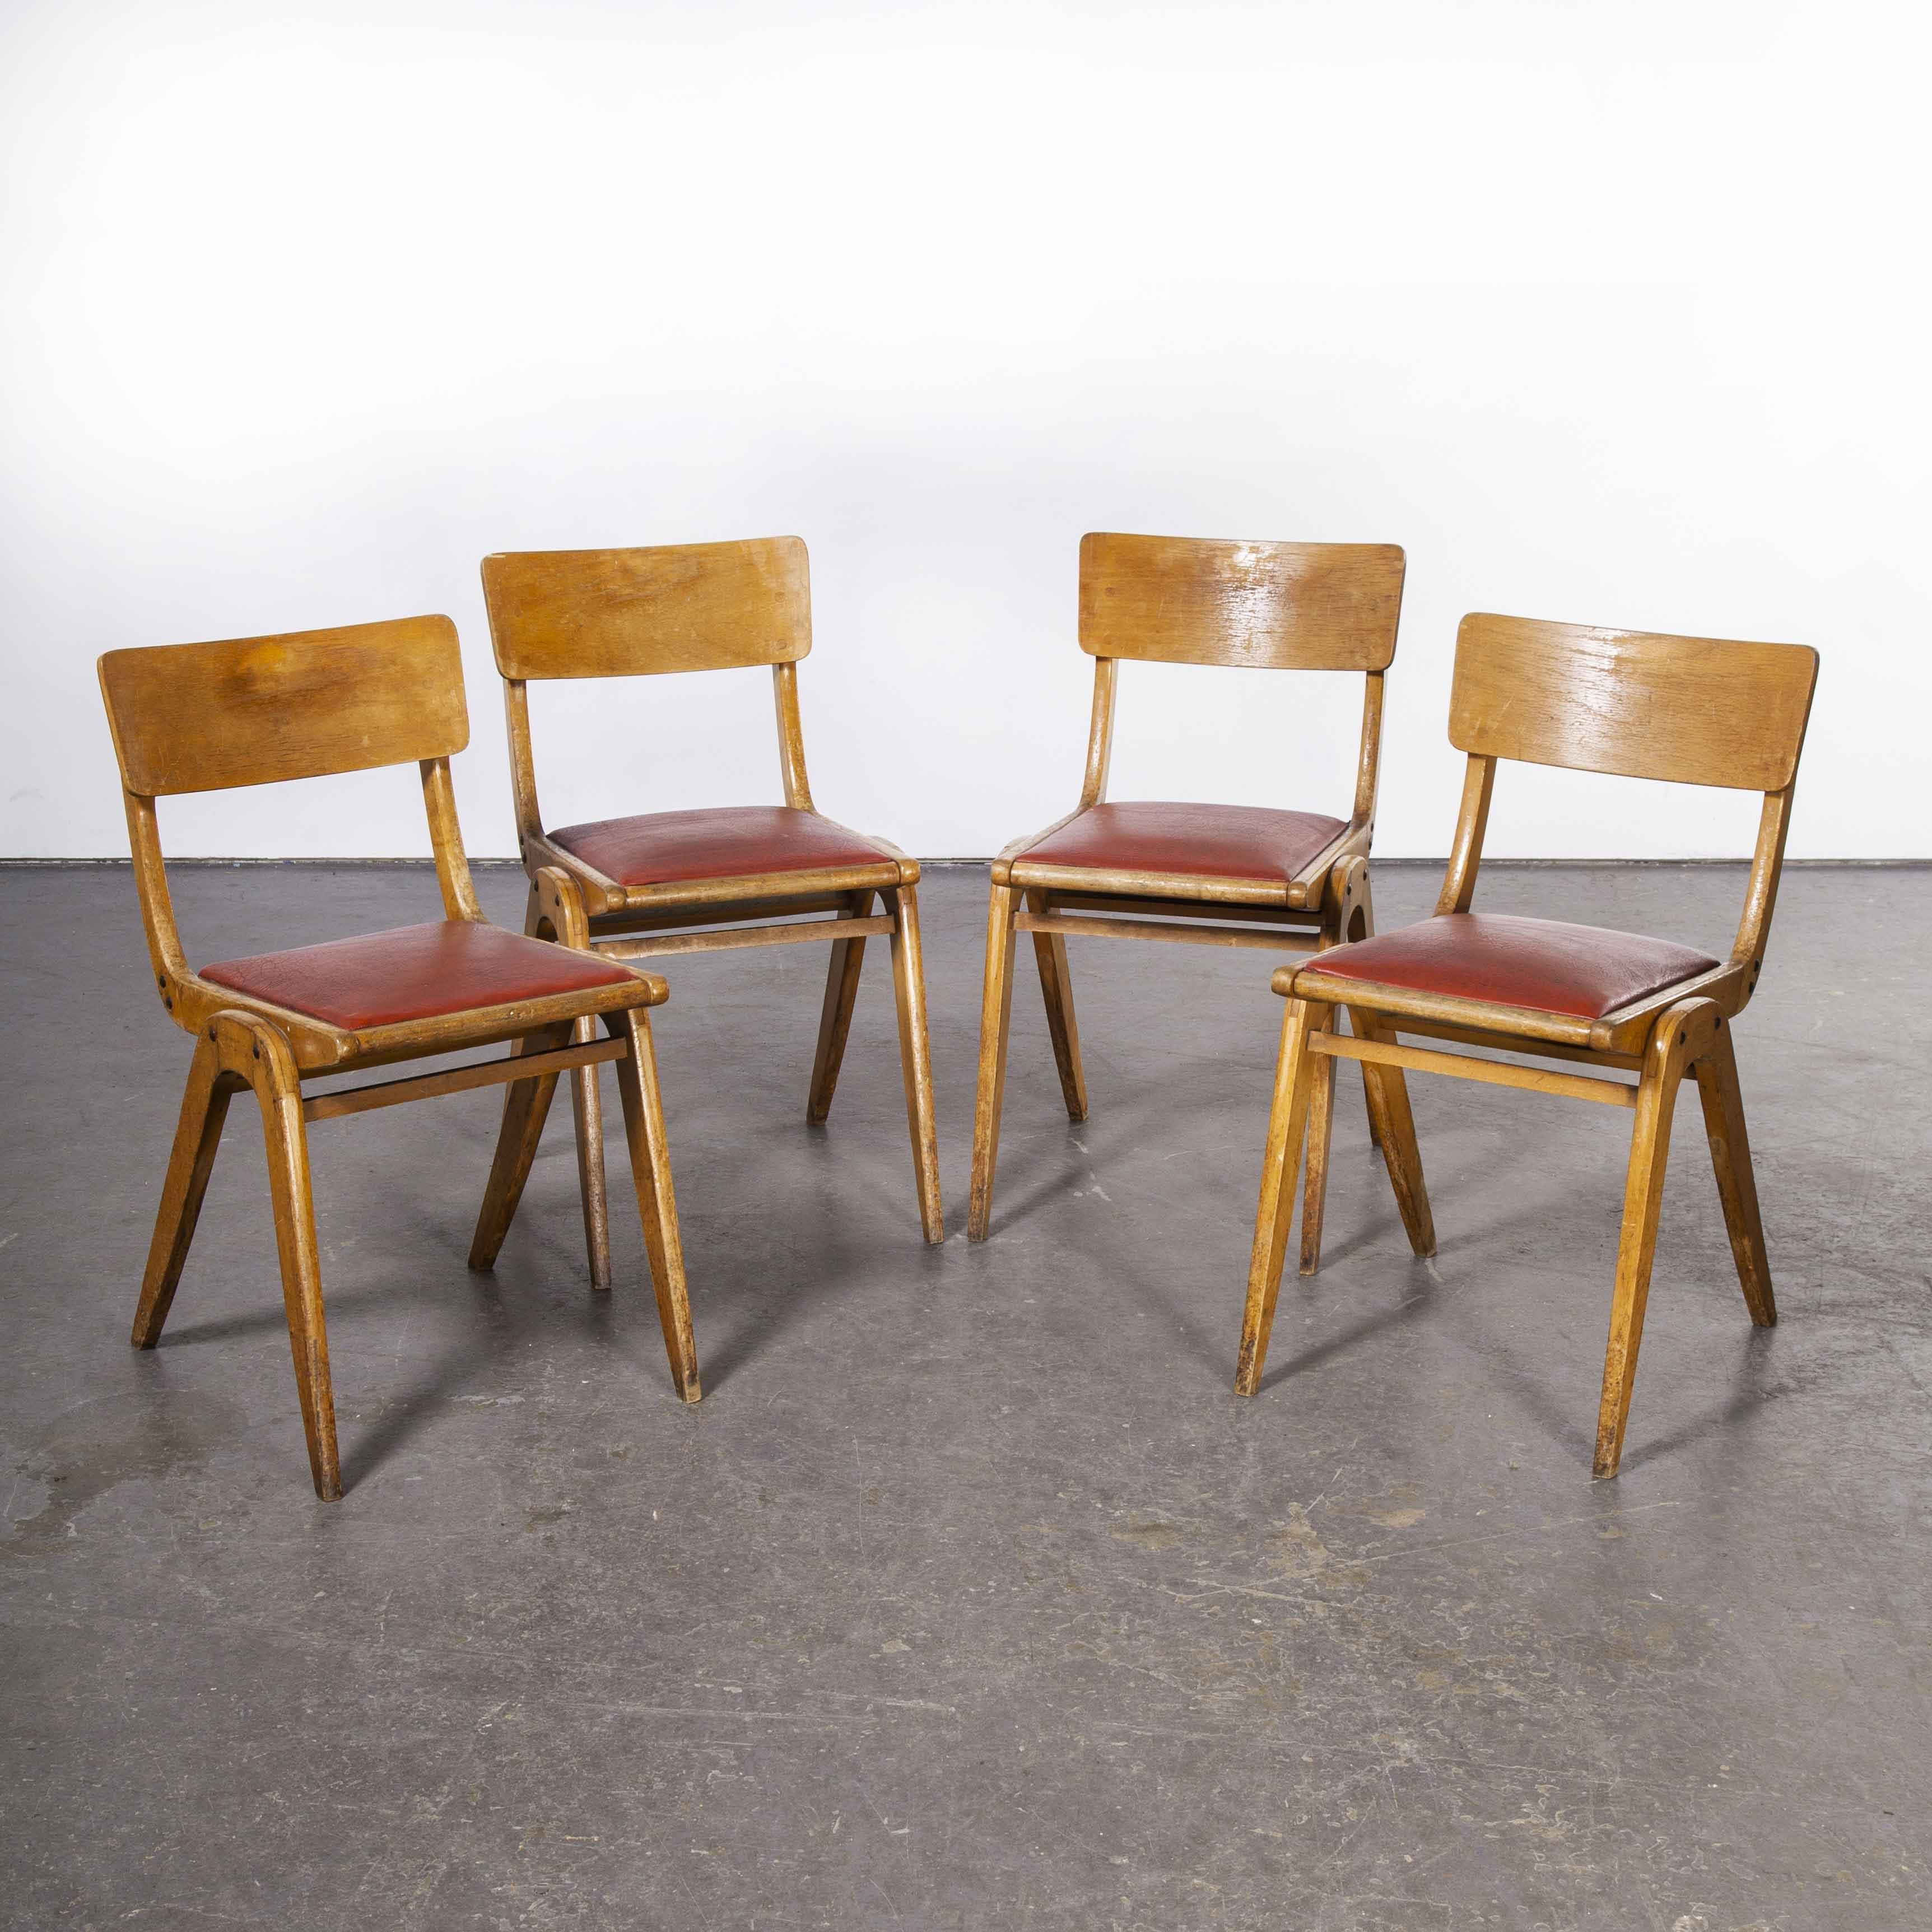 1950’s red upholstered bistro chairs – set of four

1950’s red upholstered bistro chairs – set of four. An iconic fifties chair seen throughout the British Isles but these days getting harder to find. We have seen a number of similar models no our